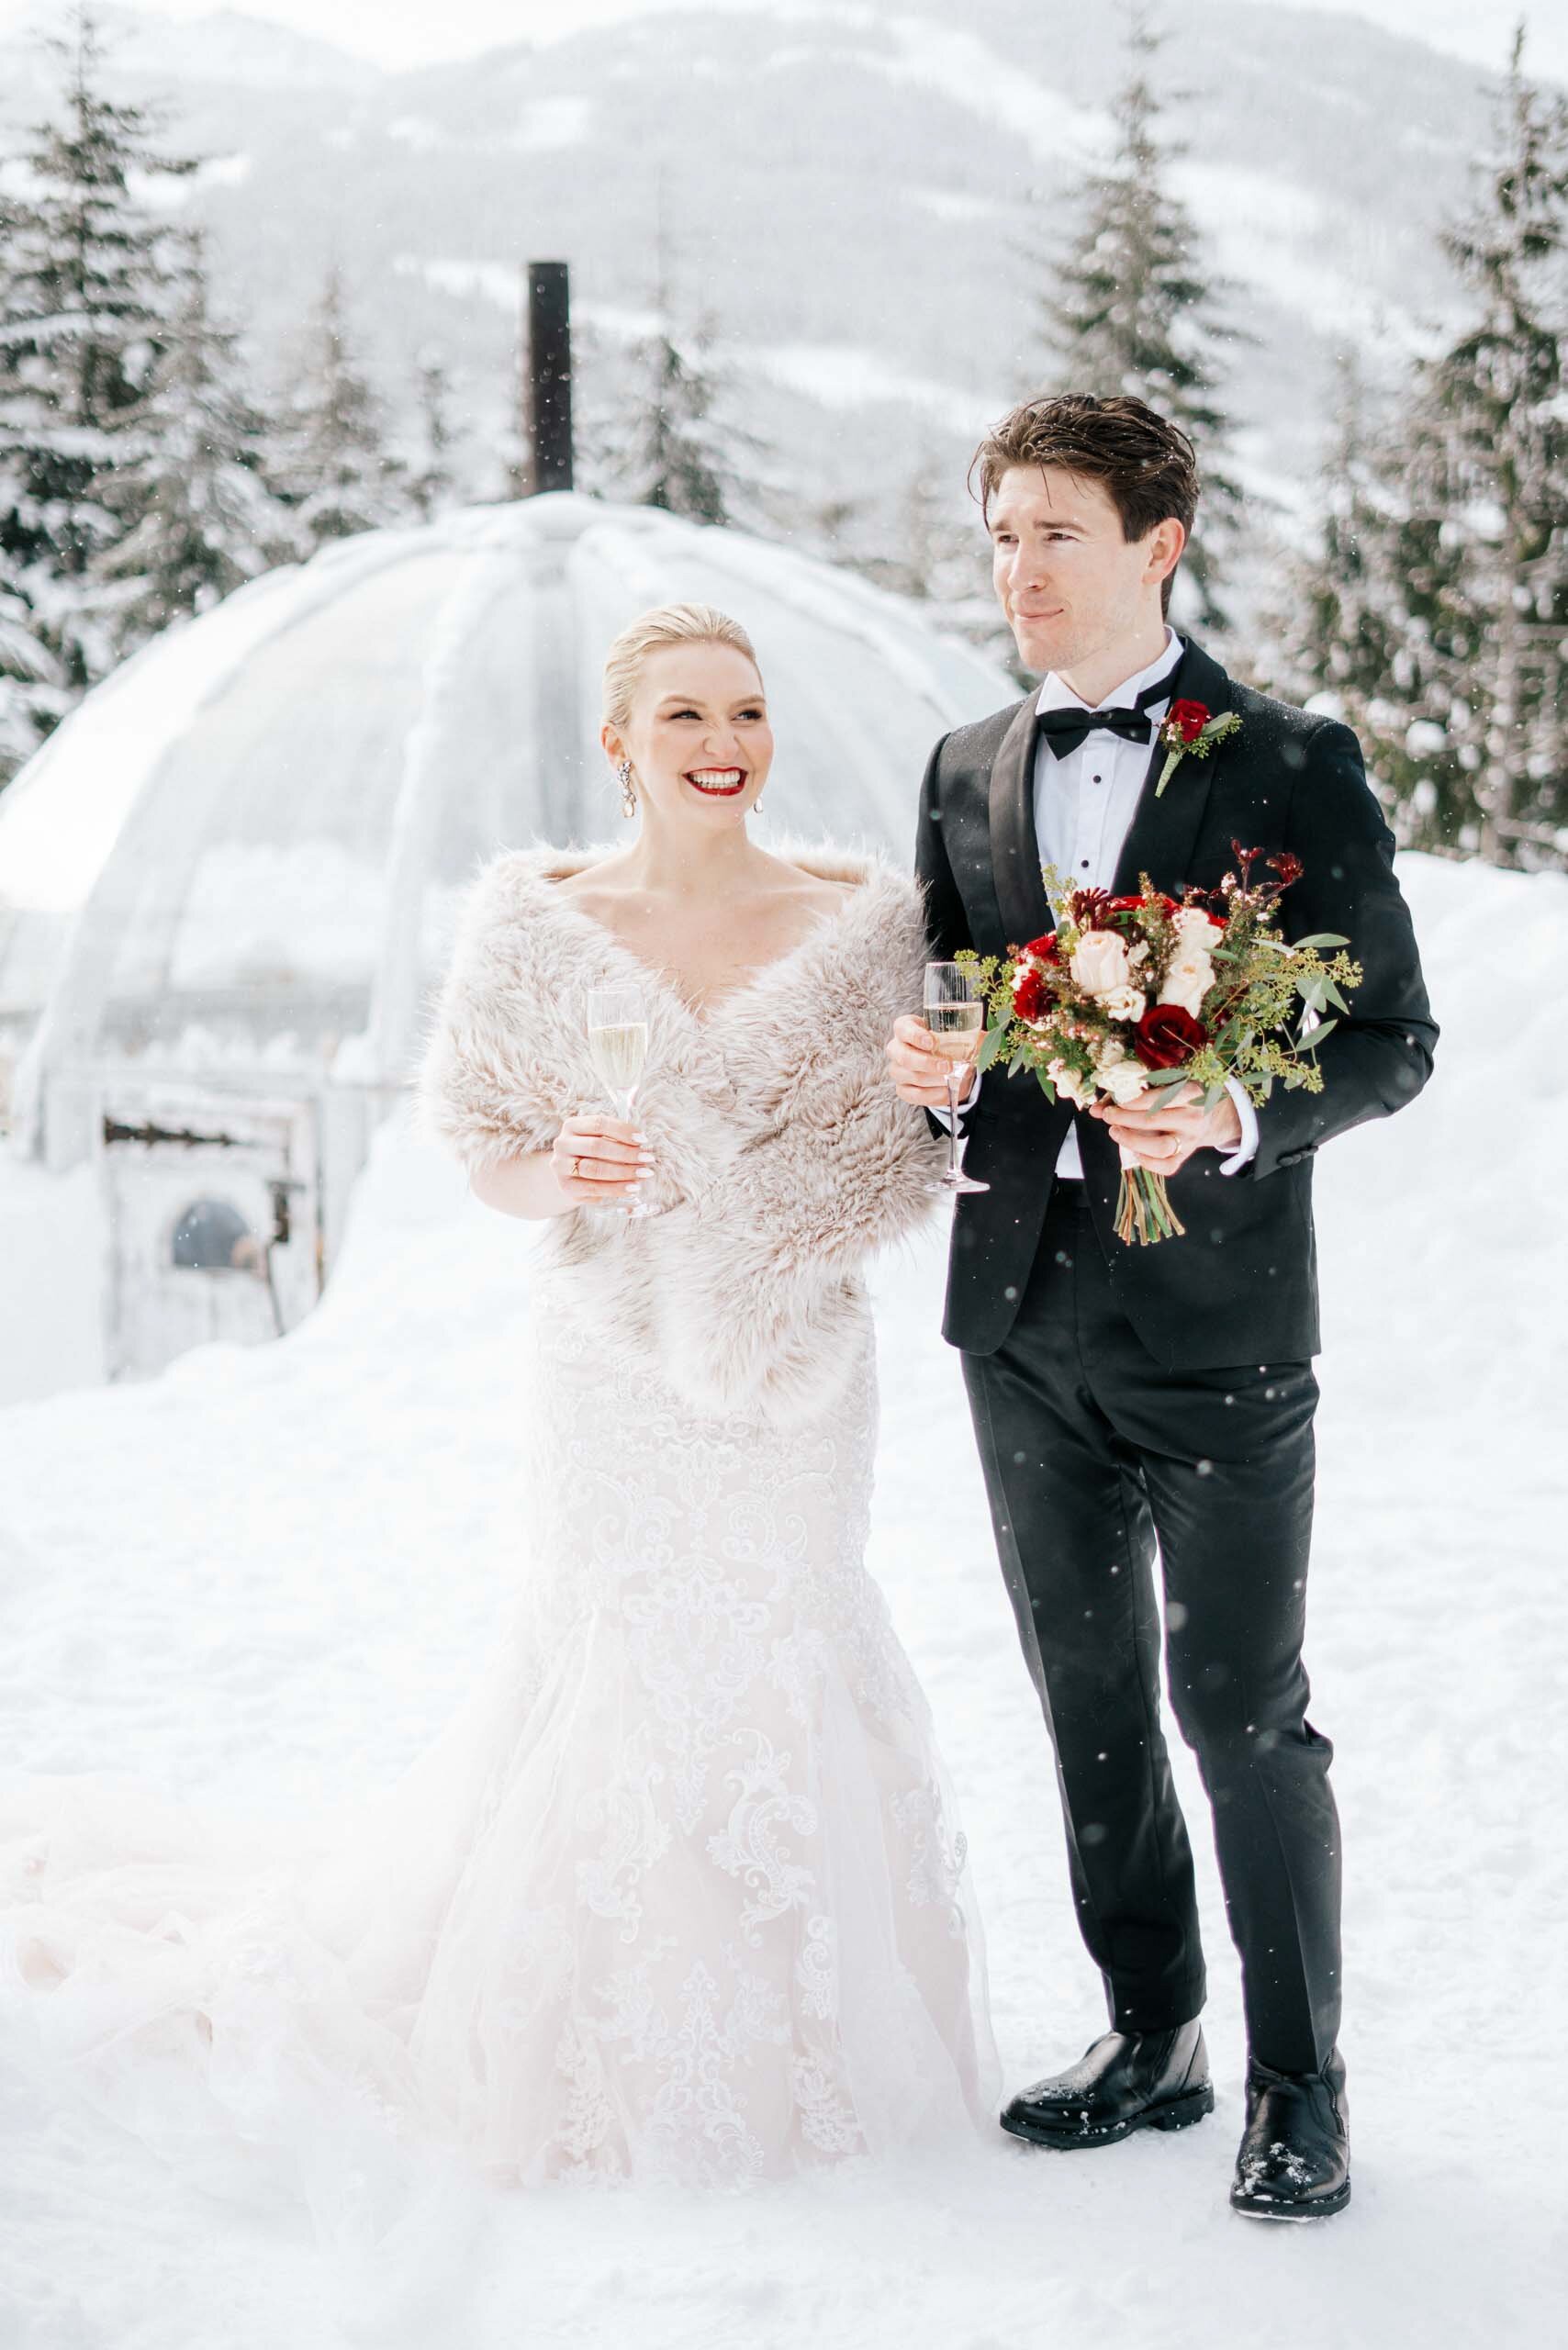 A  chilly bride covers herself with an umbrella as the snow falls and her groom holds her umbrella for her.